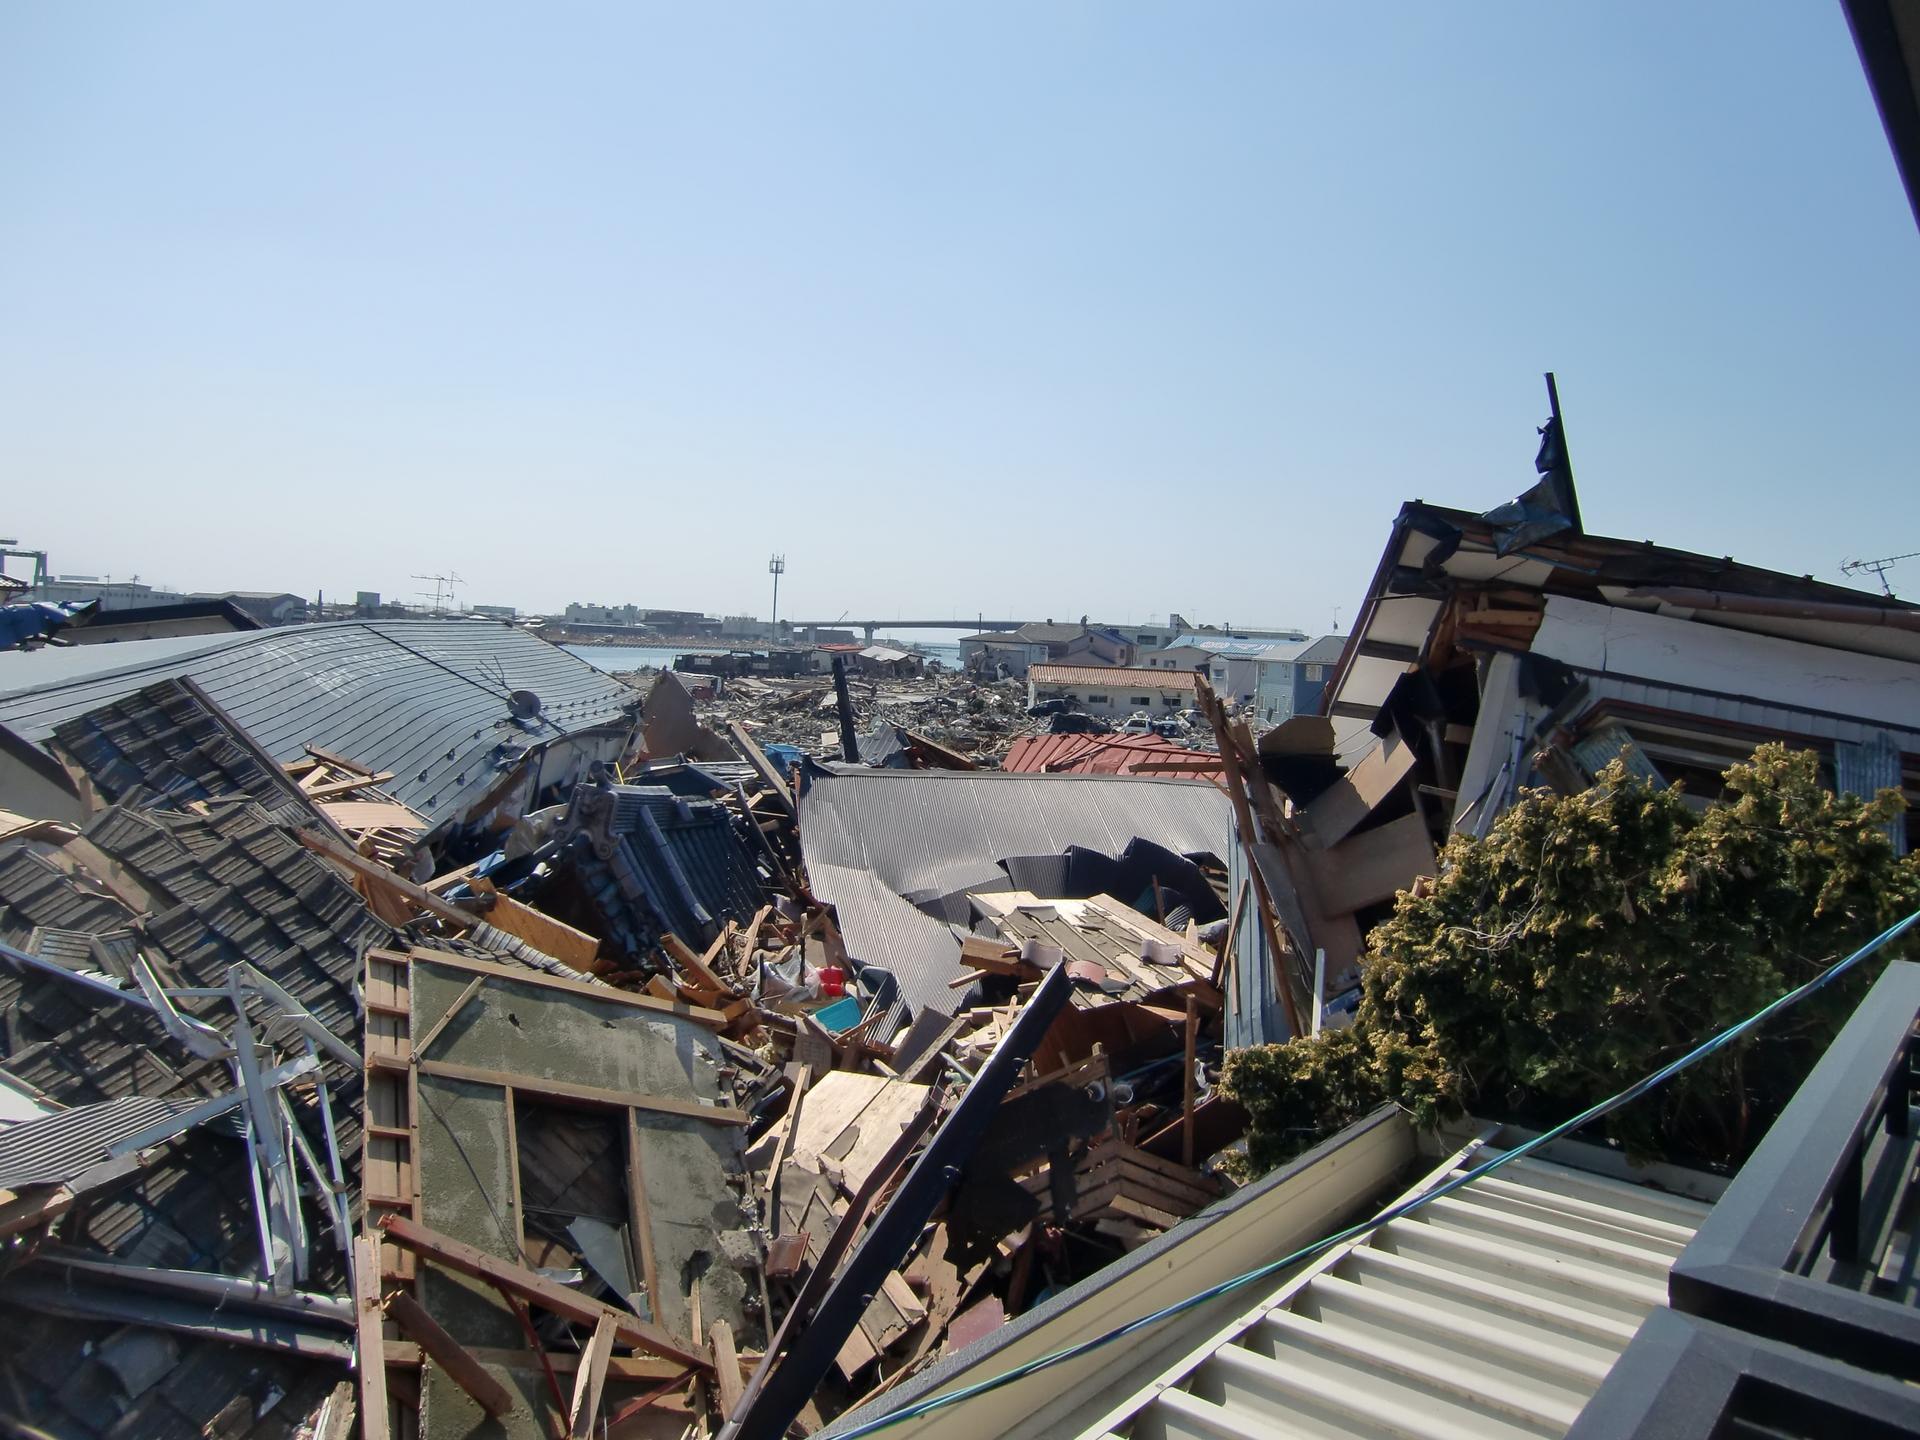 Houses are shown destroyed and collapsed on each other.